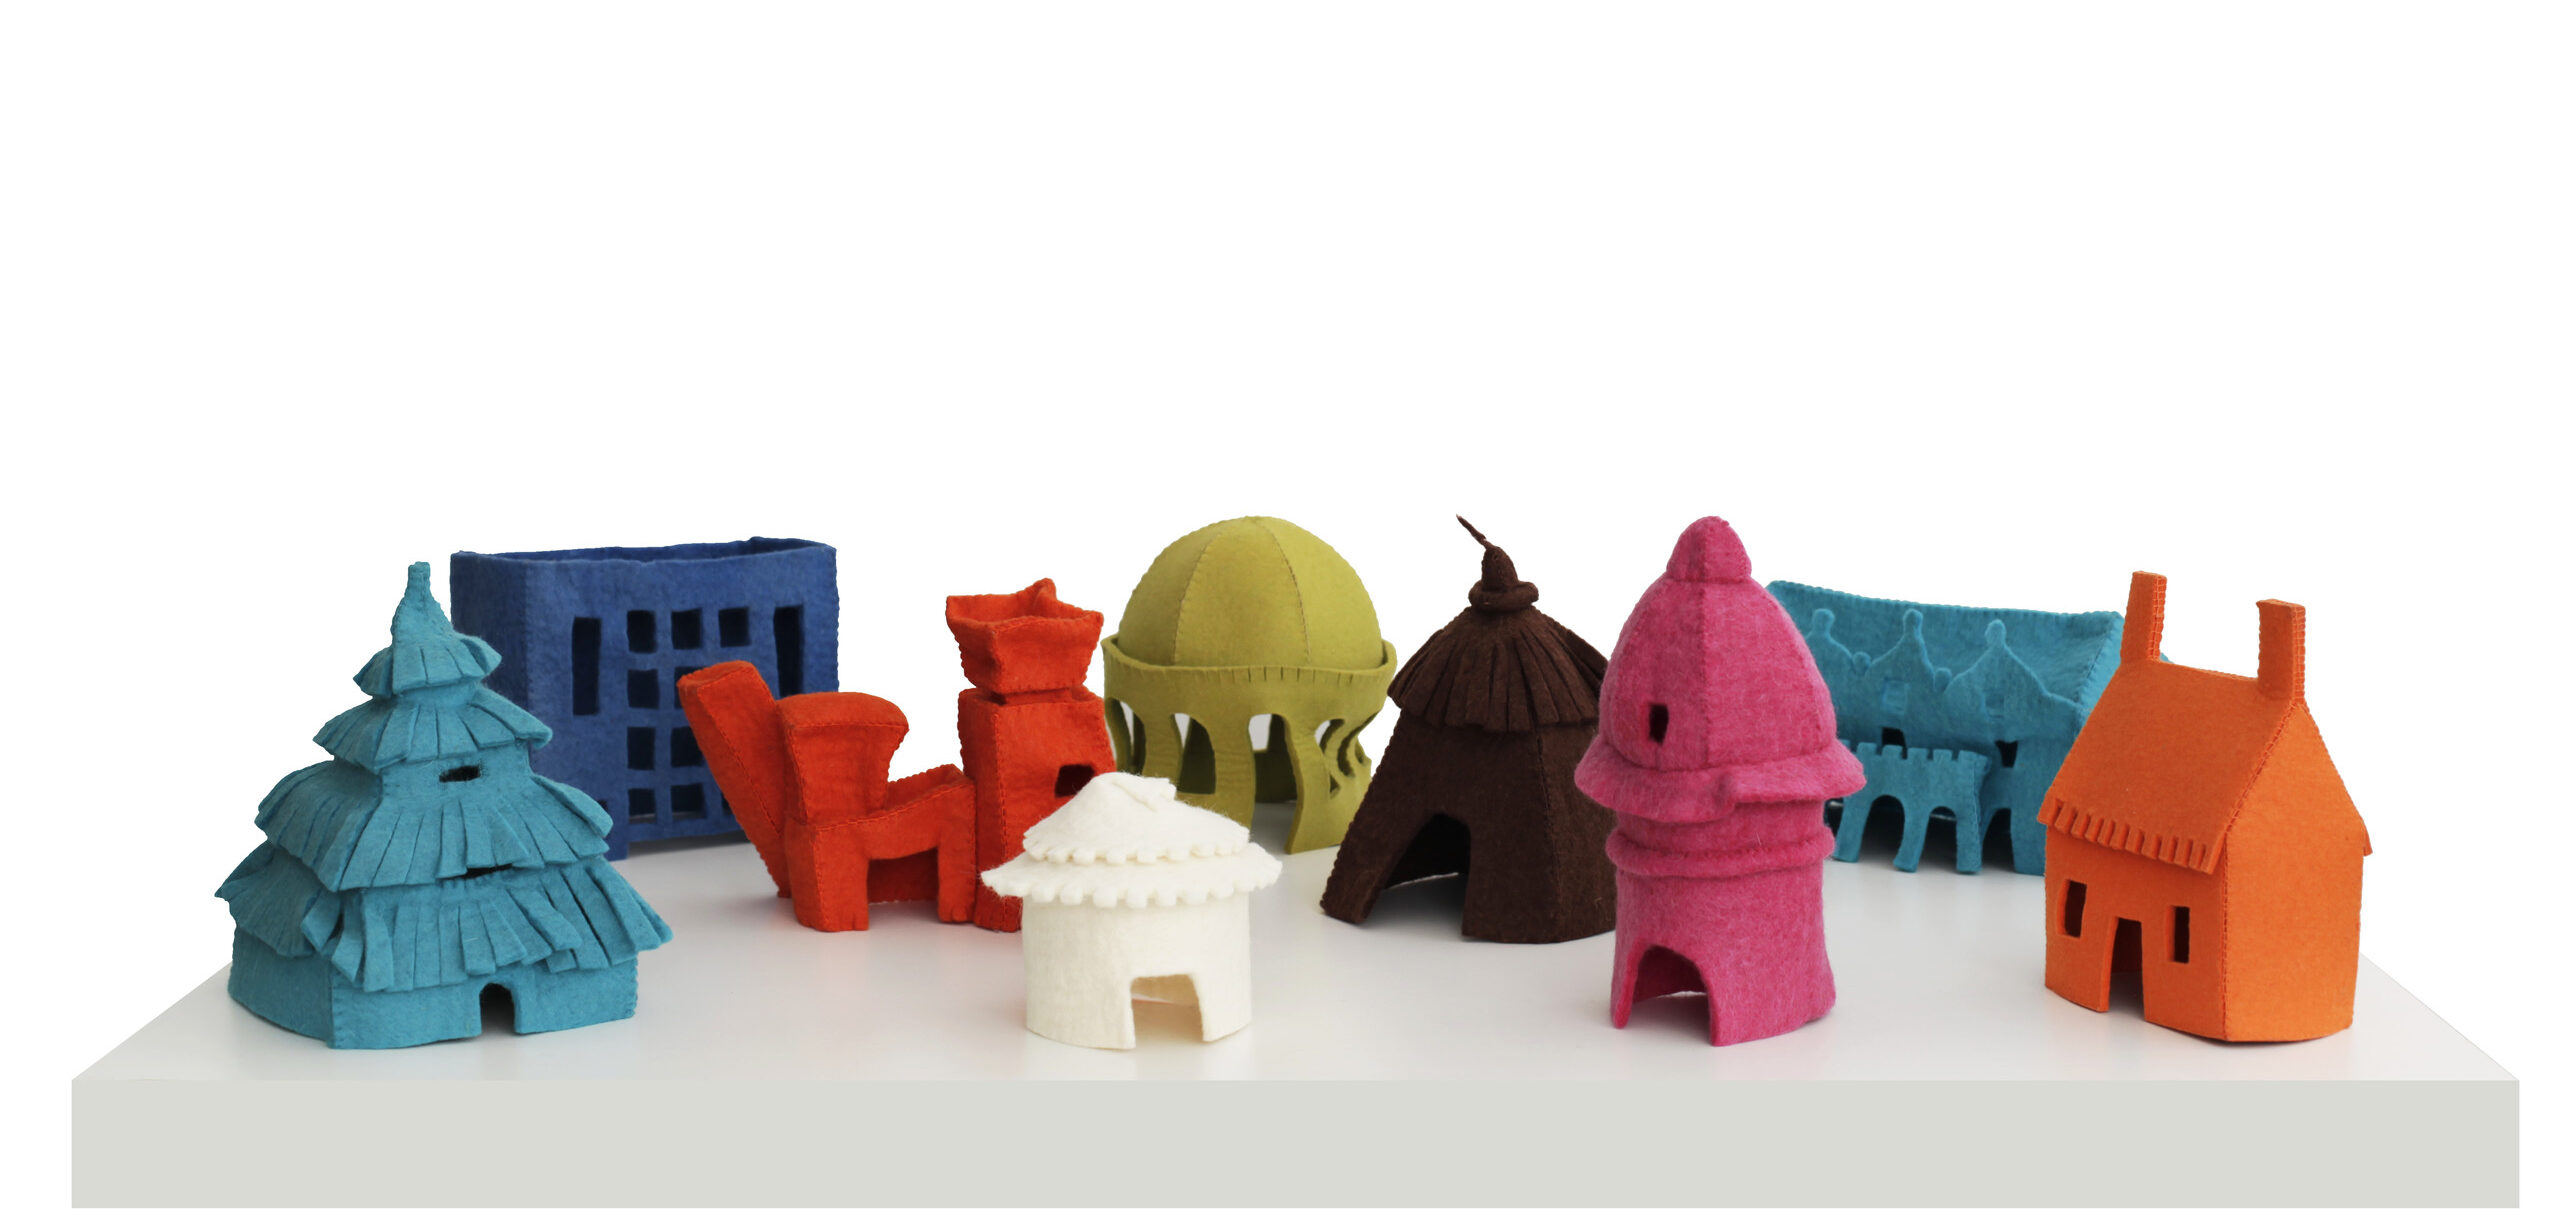 Arrangement of nine small, felt houses on a white table. Each house is a different, vibrant color and represents a different style of architecture spanning time and cultures—including a hut, a yurt, a cottage, art deco, postmodern architecture, and more.